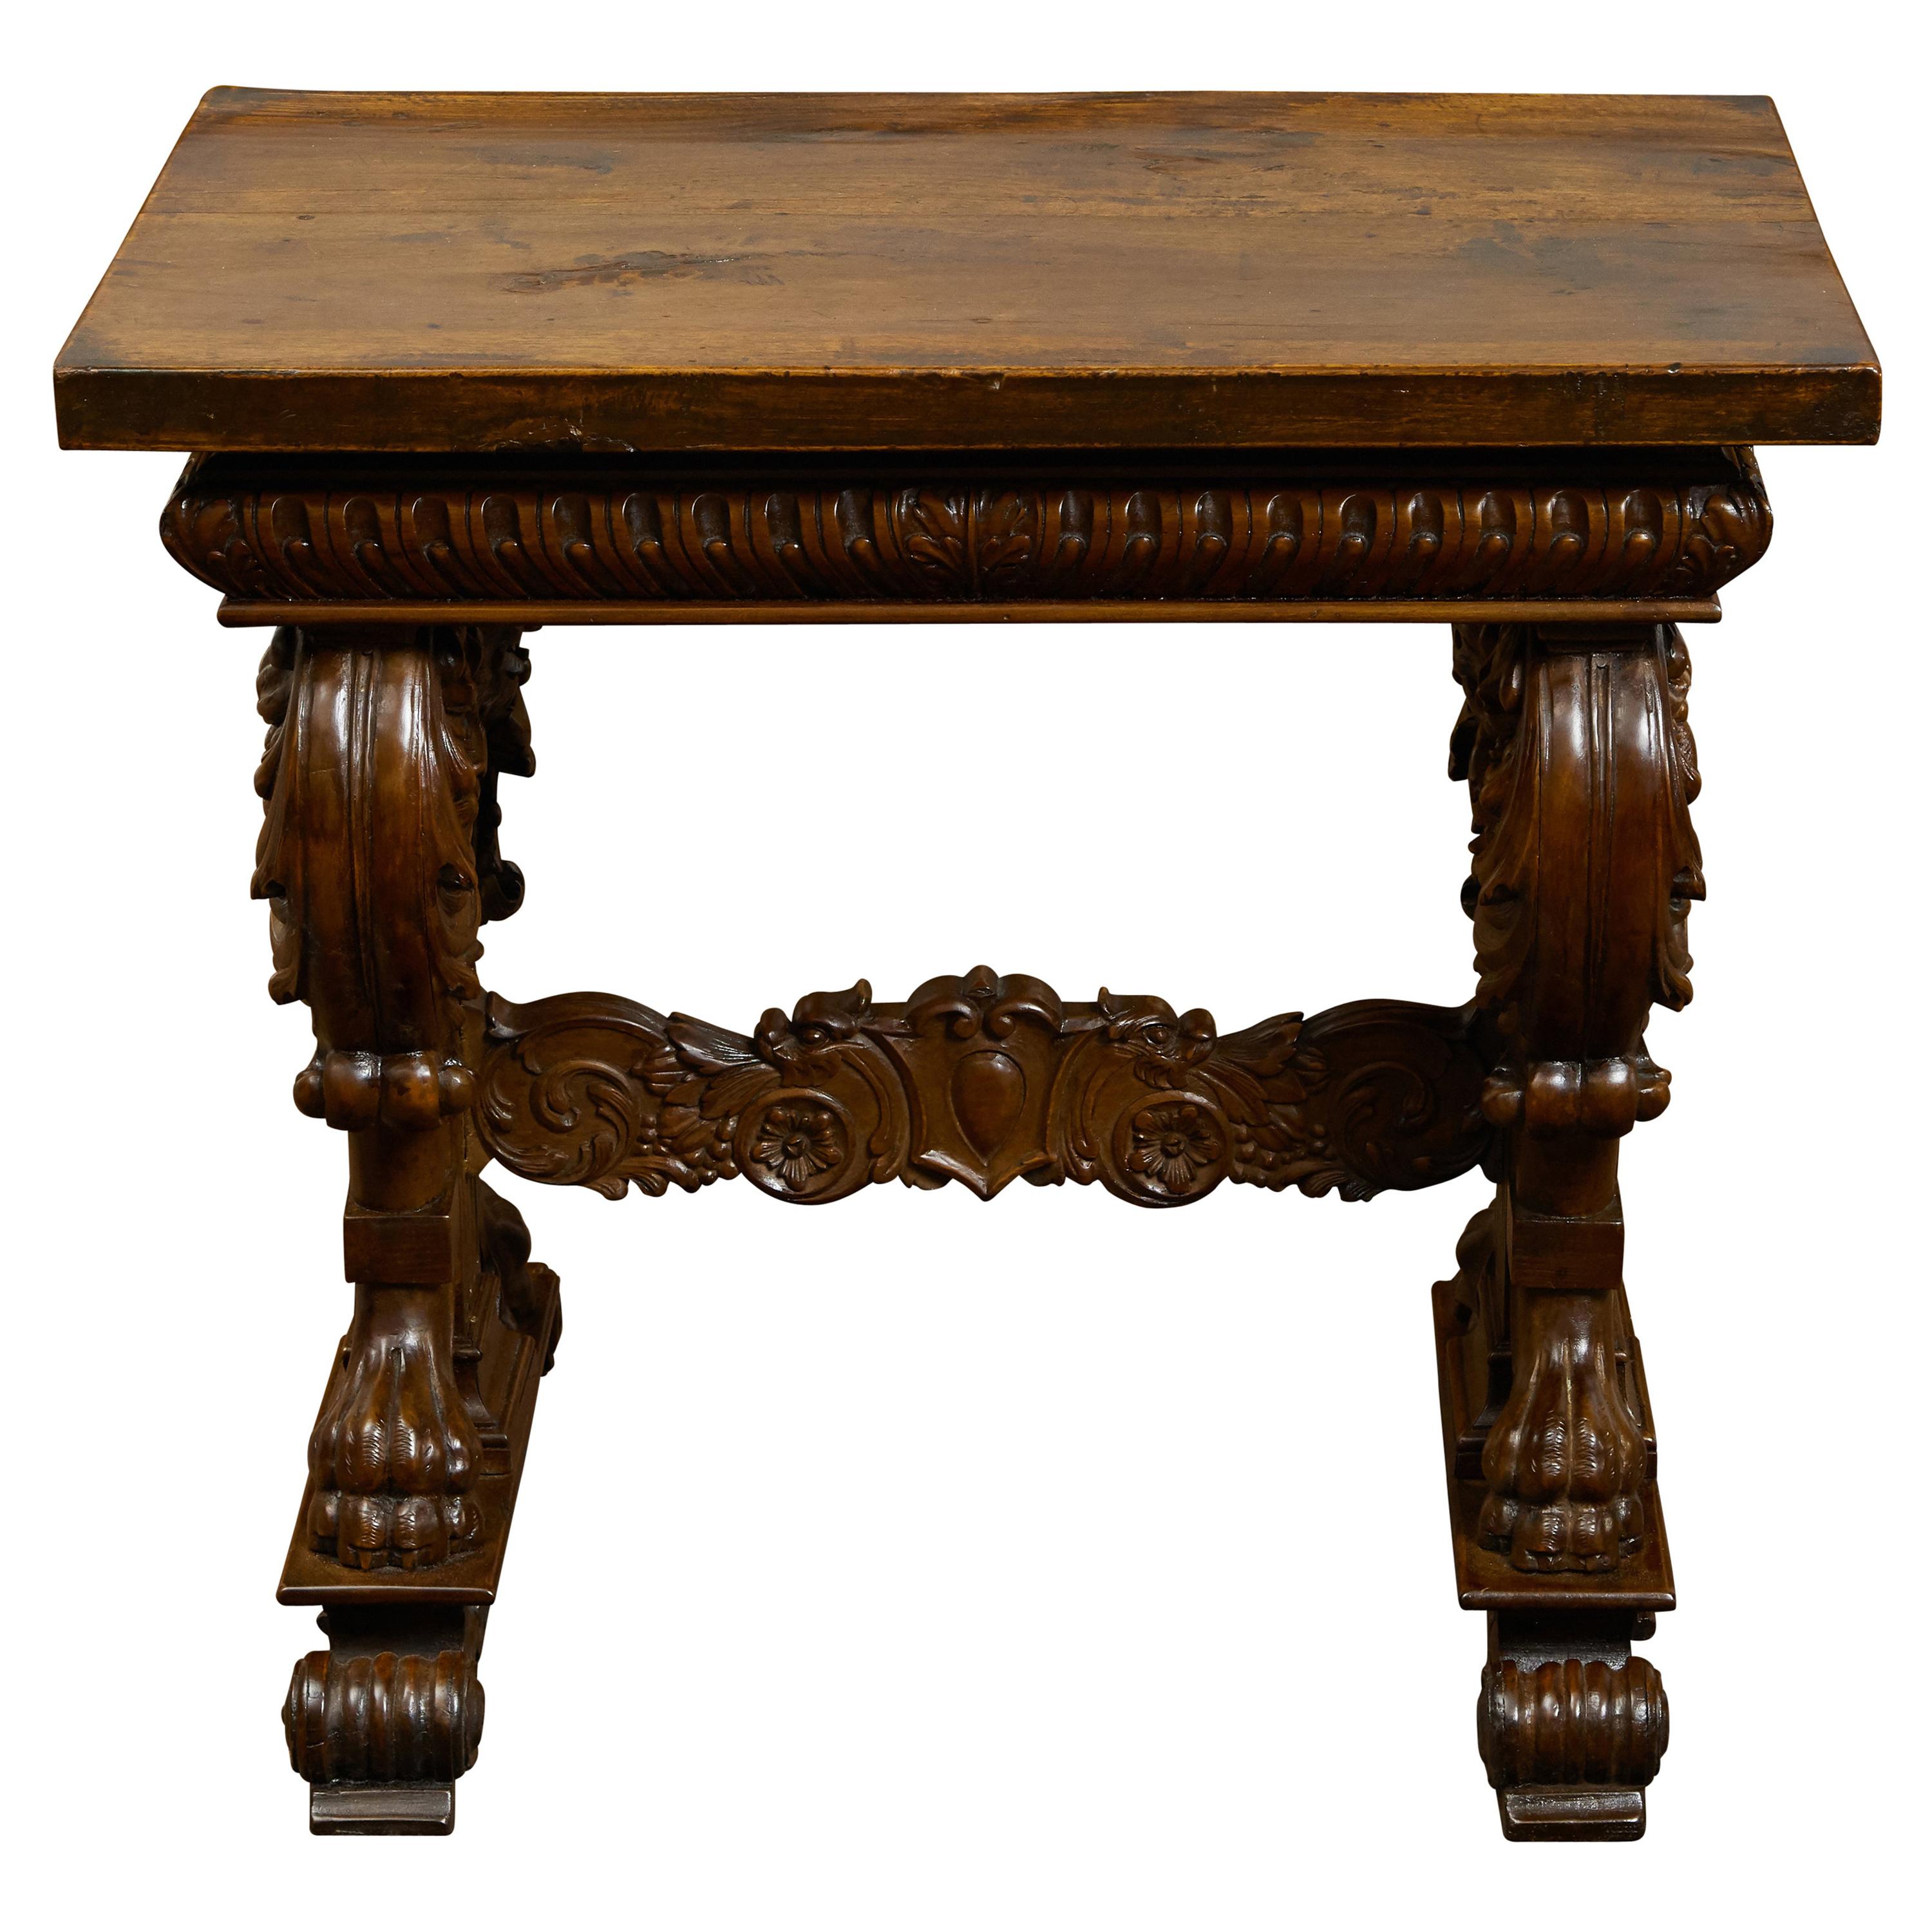 Italian 1800s Walnut Side Table with Lion Motifs and Richly Carved Trestle Base For Sale